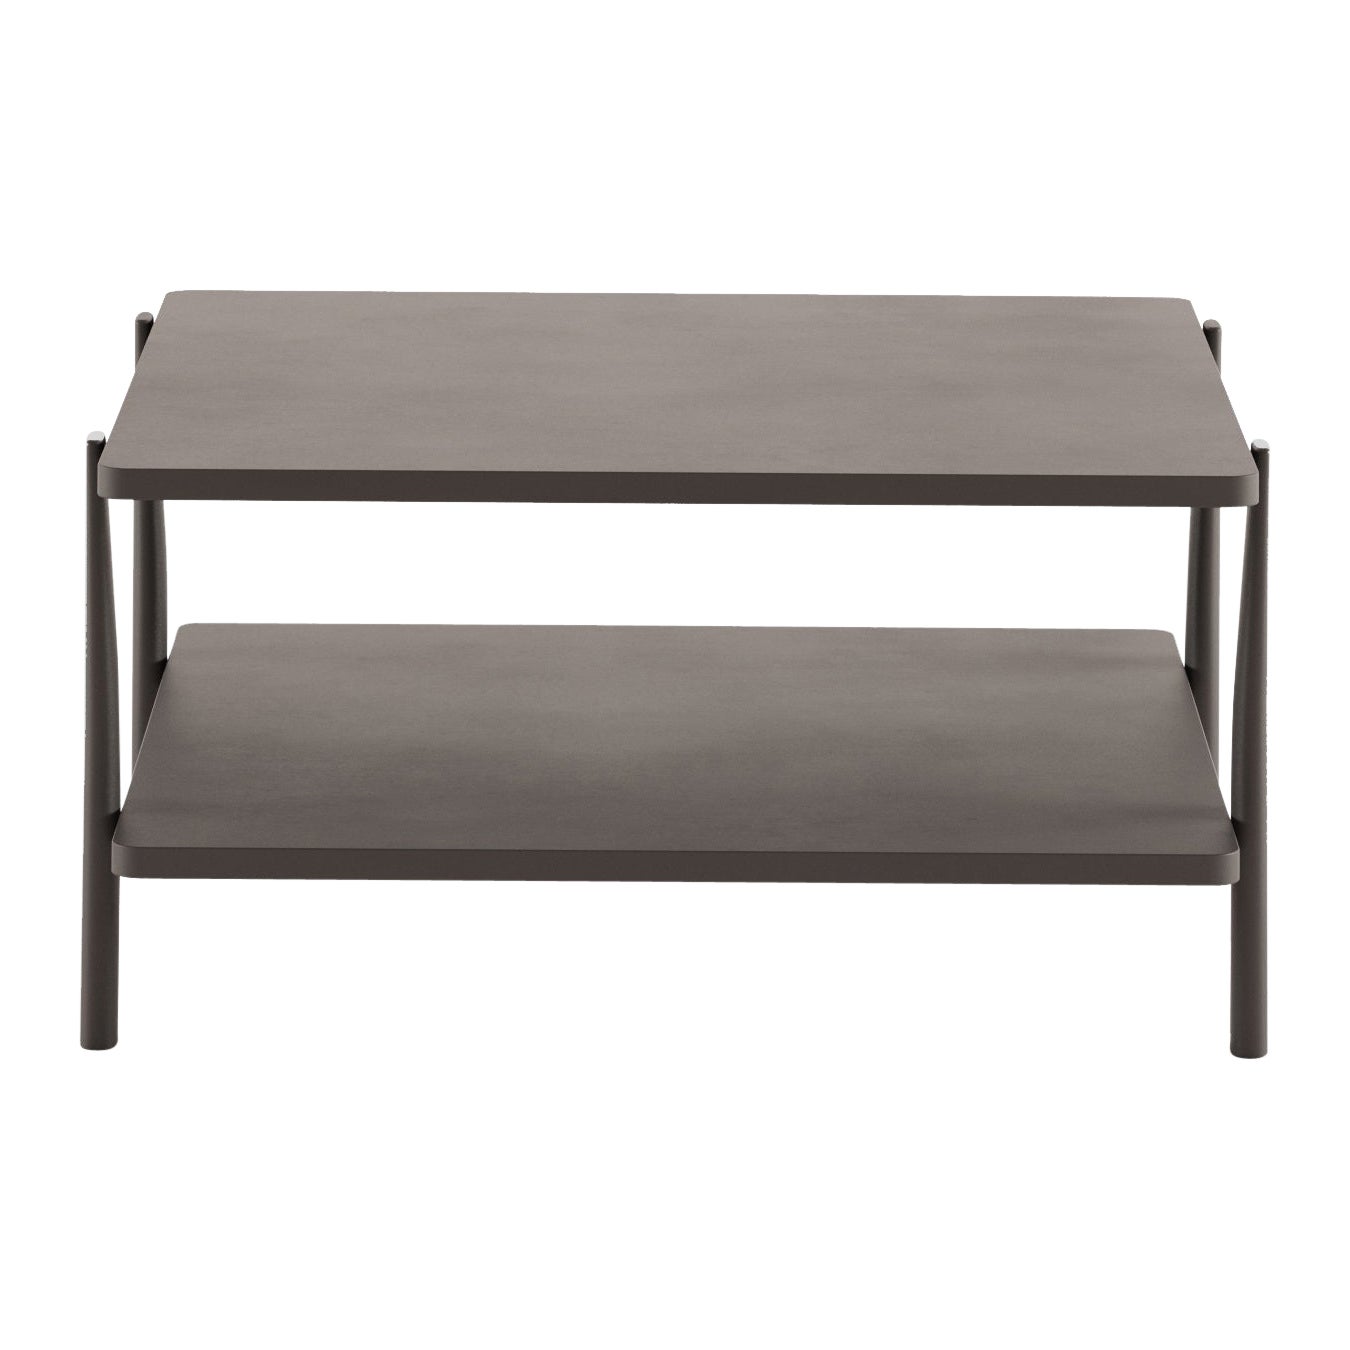 Alias 954 Eleven Low Table Double Square in Graphite Grey Lacquered Frame